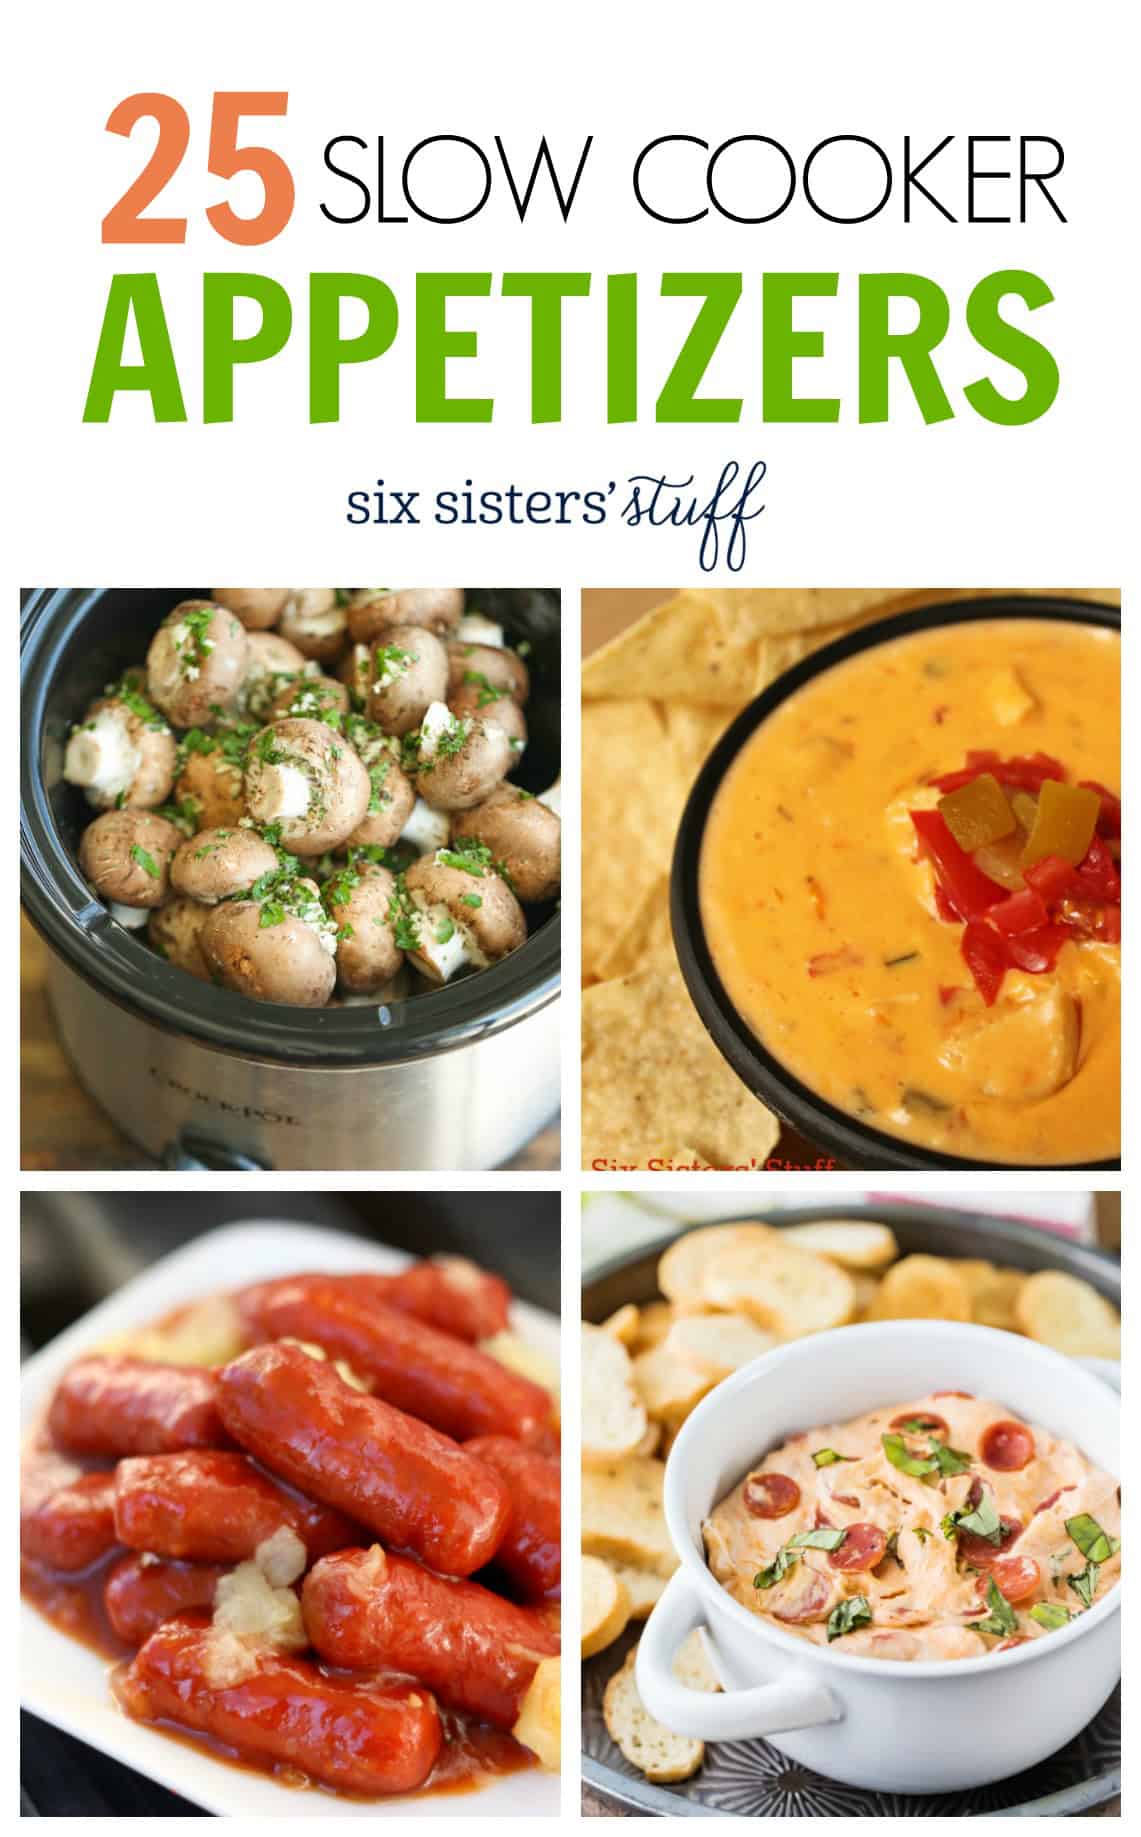 The 25 Best Crockpot Appetizers Quick + Easy